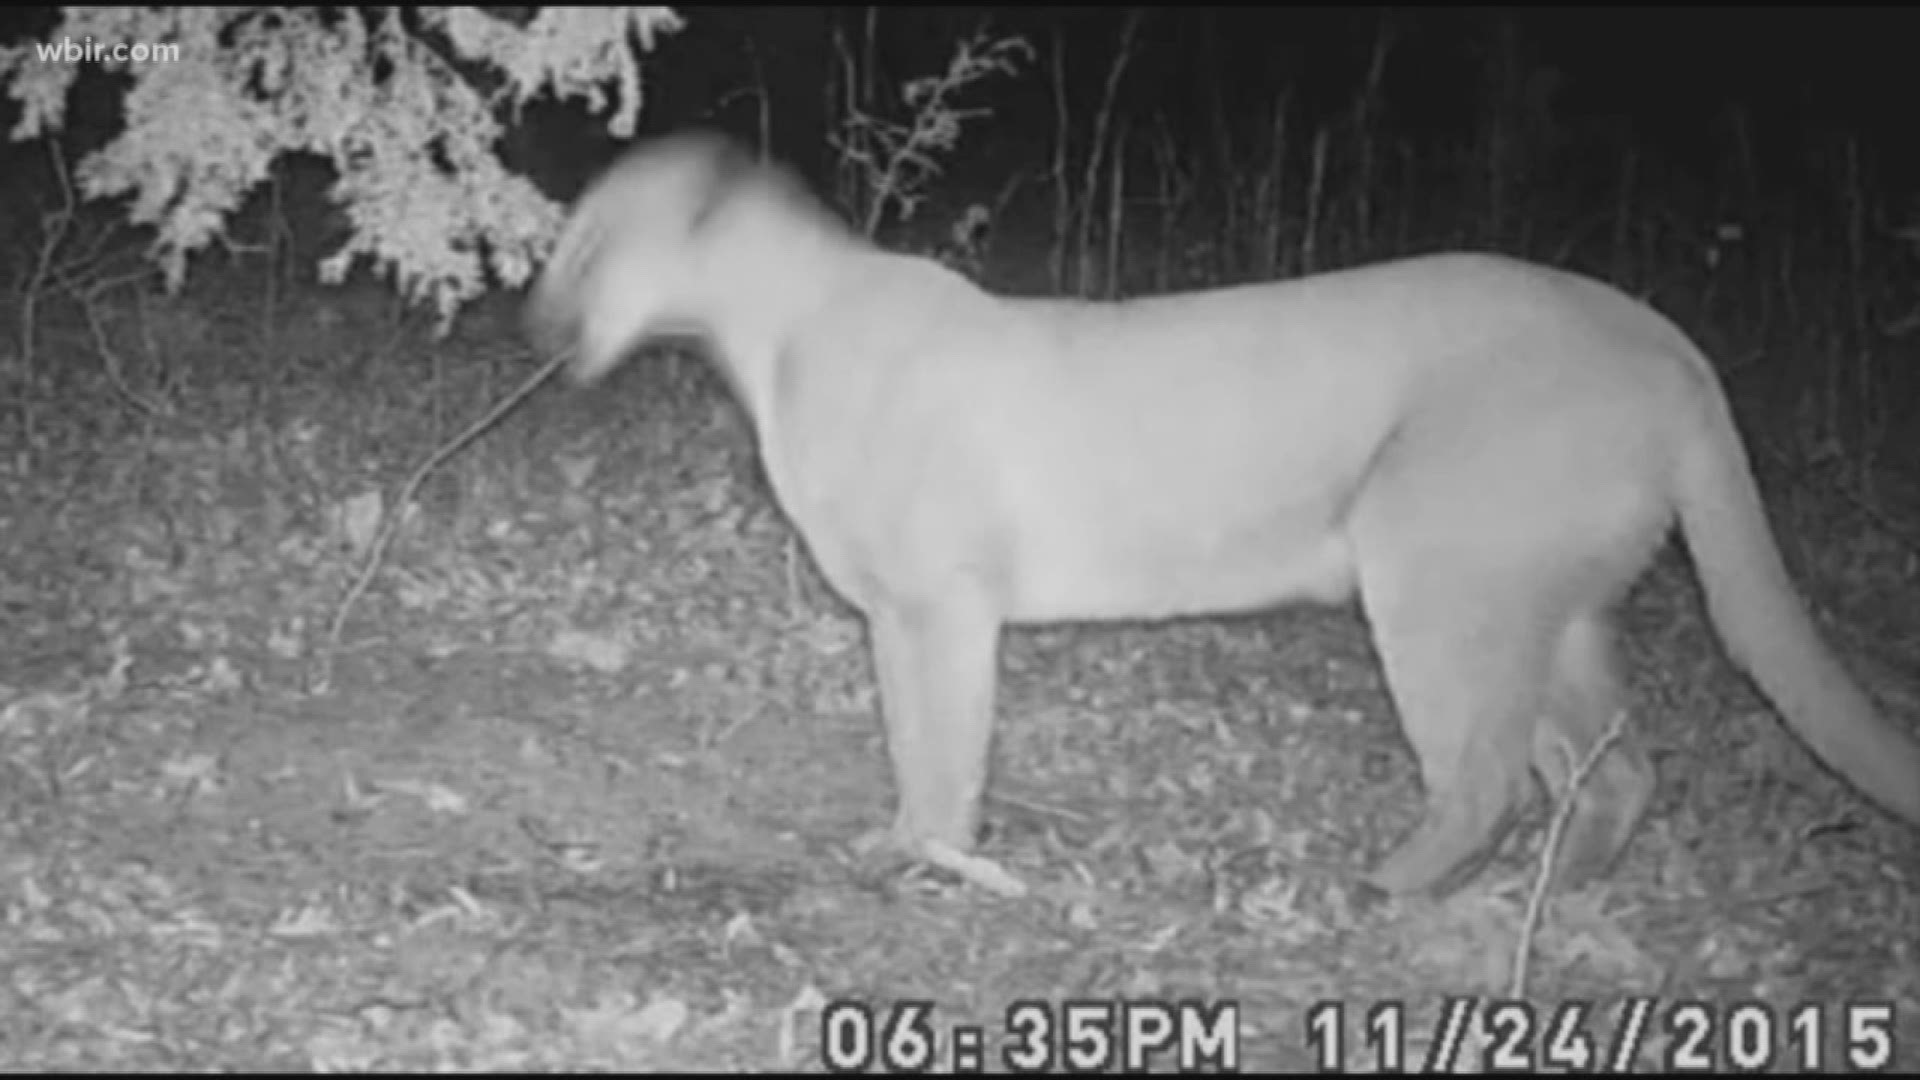 Cougars, alligators, and armadillos are showing up in parts of the state, but it's unlikely they'll ever establish a large population in East Tenn.